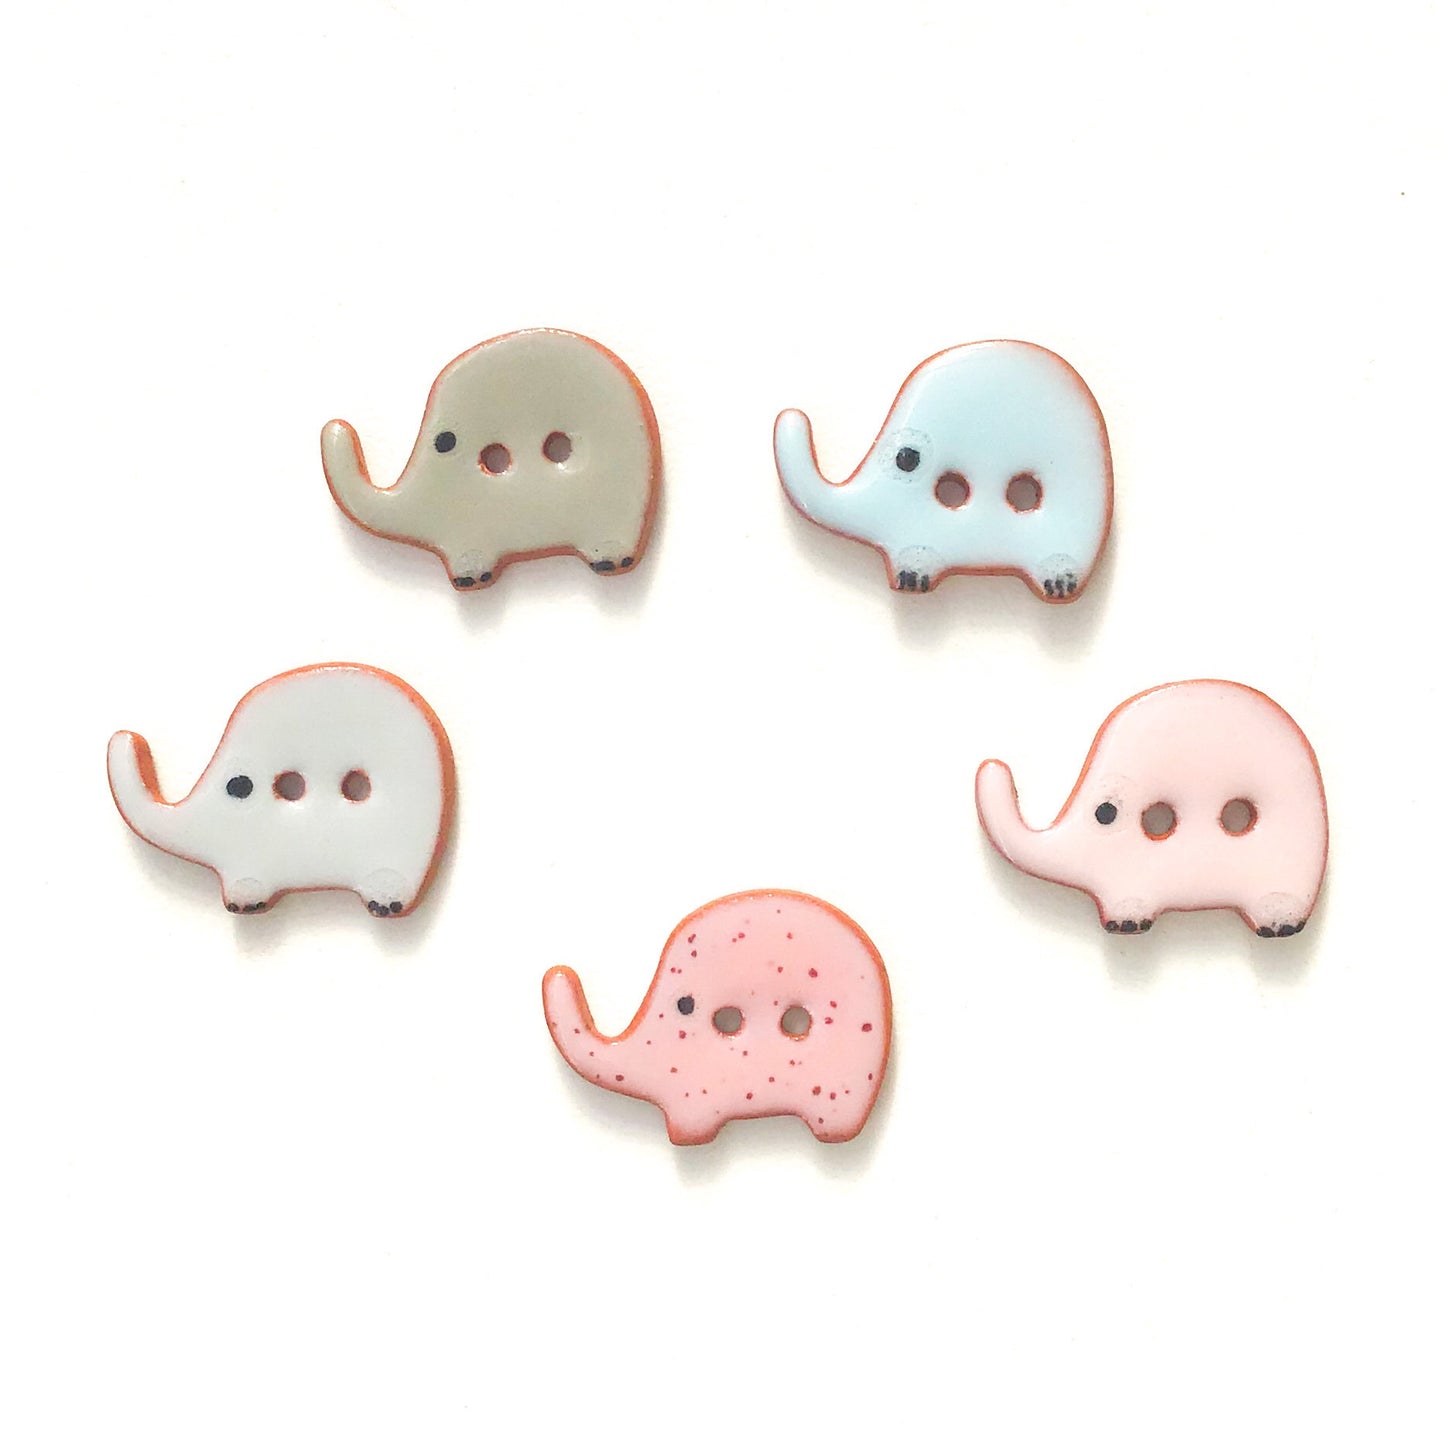 Elephant Buttons - Ceramic Elephant Buttons -Children's Animal Buttons (ws-84)